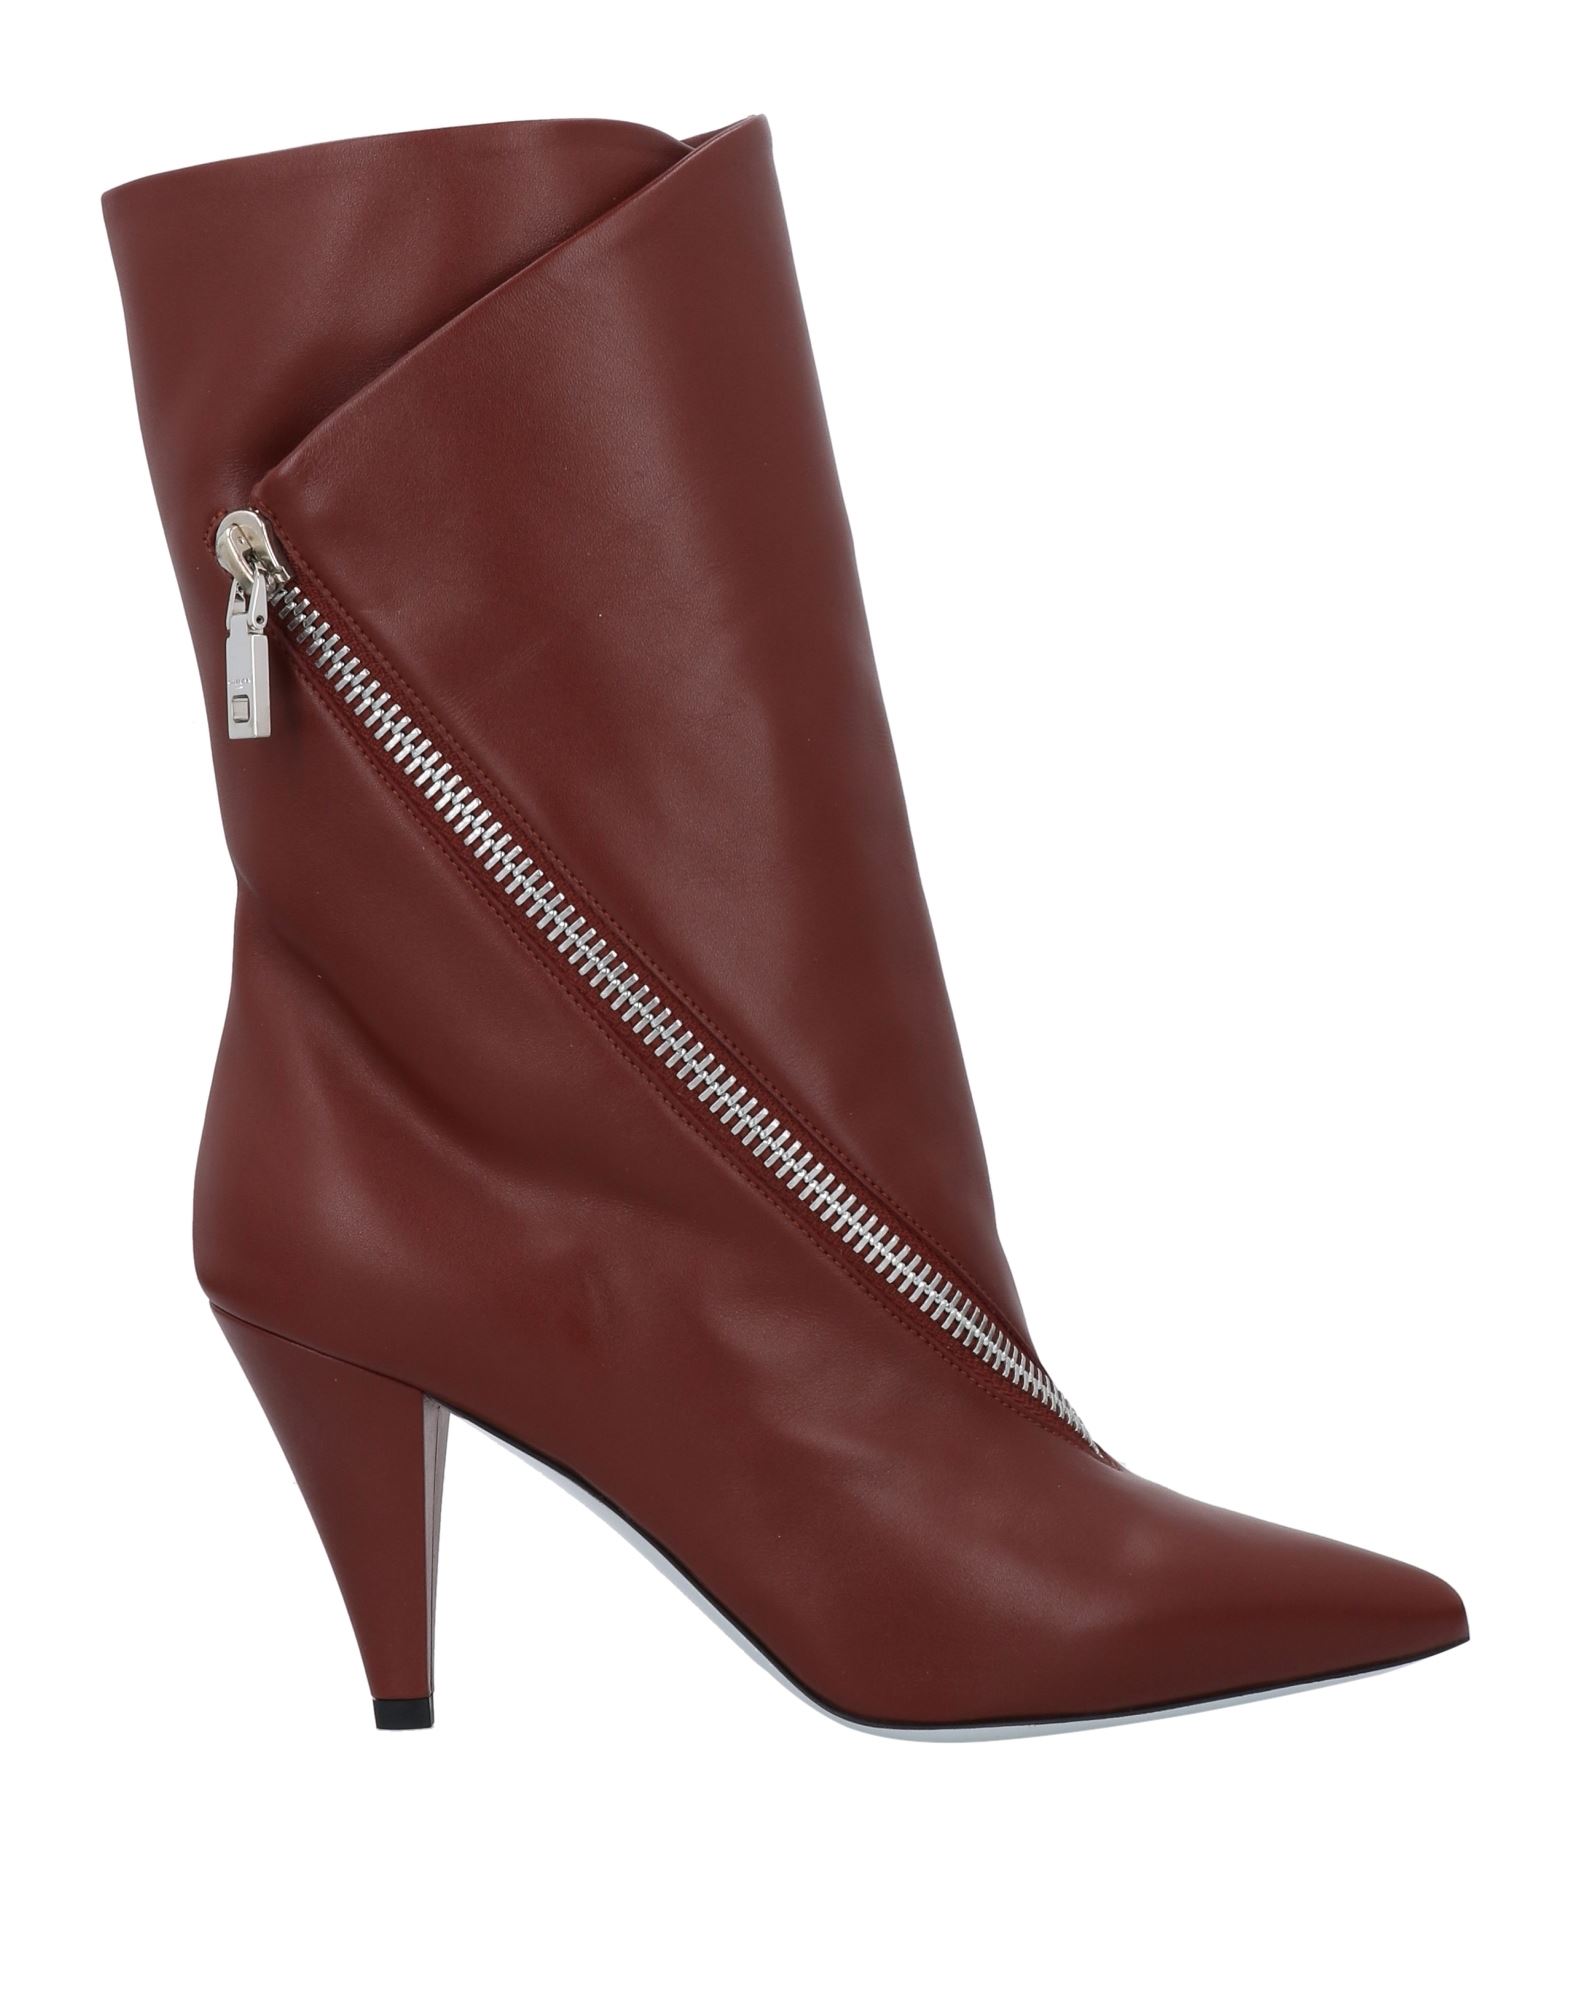 Givenchy Ankle Boots In Cocoa